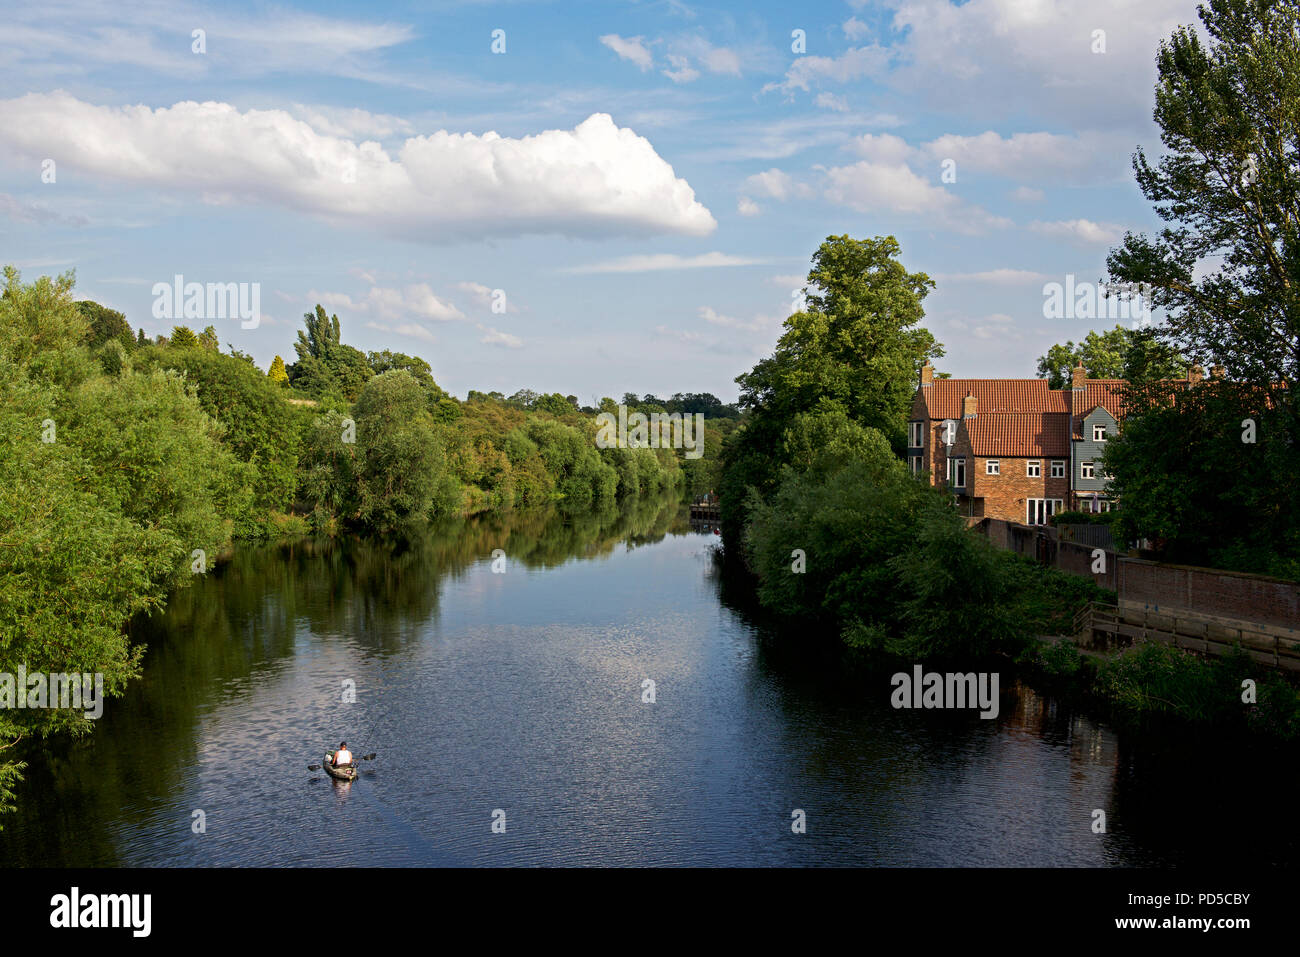 Man in inflatable kayak on River Tees, Yarm, North Yorkshire, England UK Stock Photo